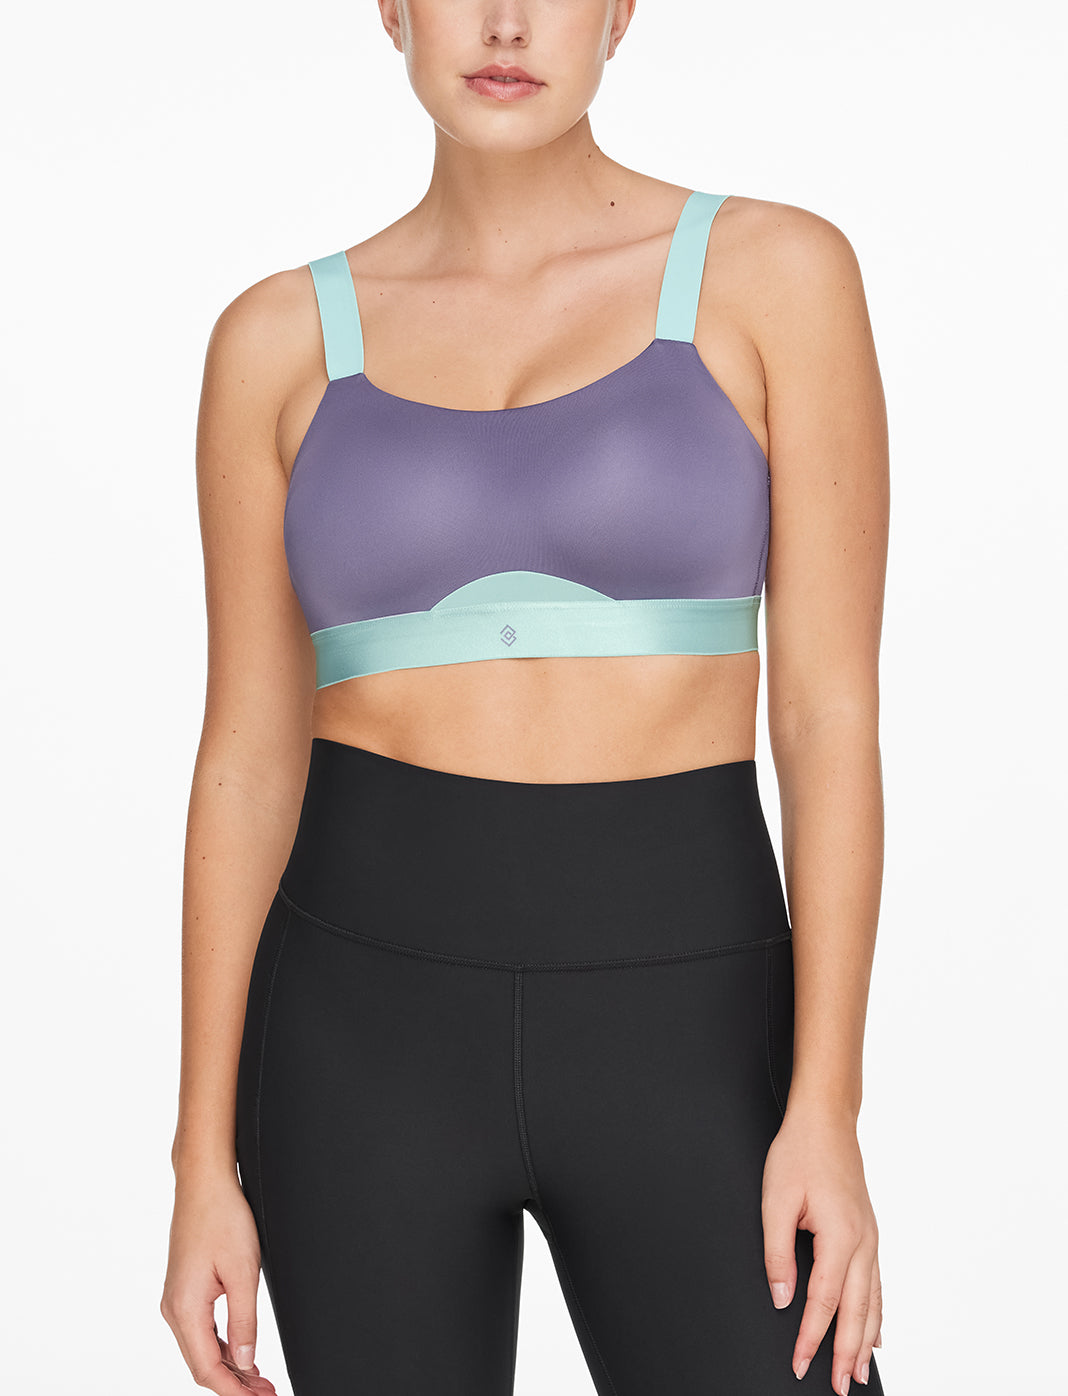 Crop Top Bras – The Best Option for Comfort and Style - Sports Bras Direct